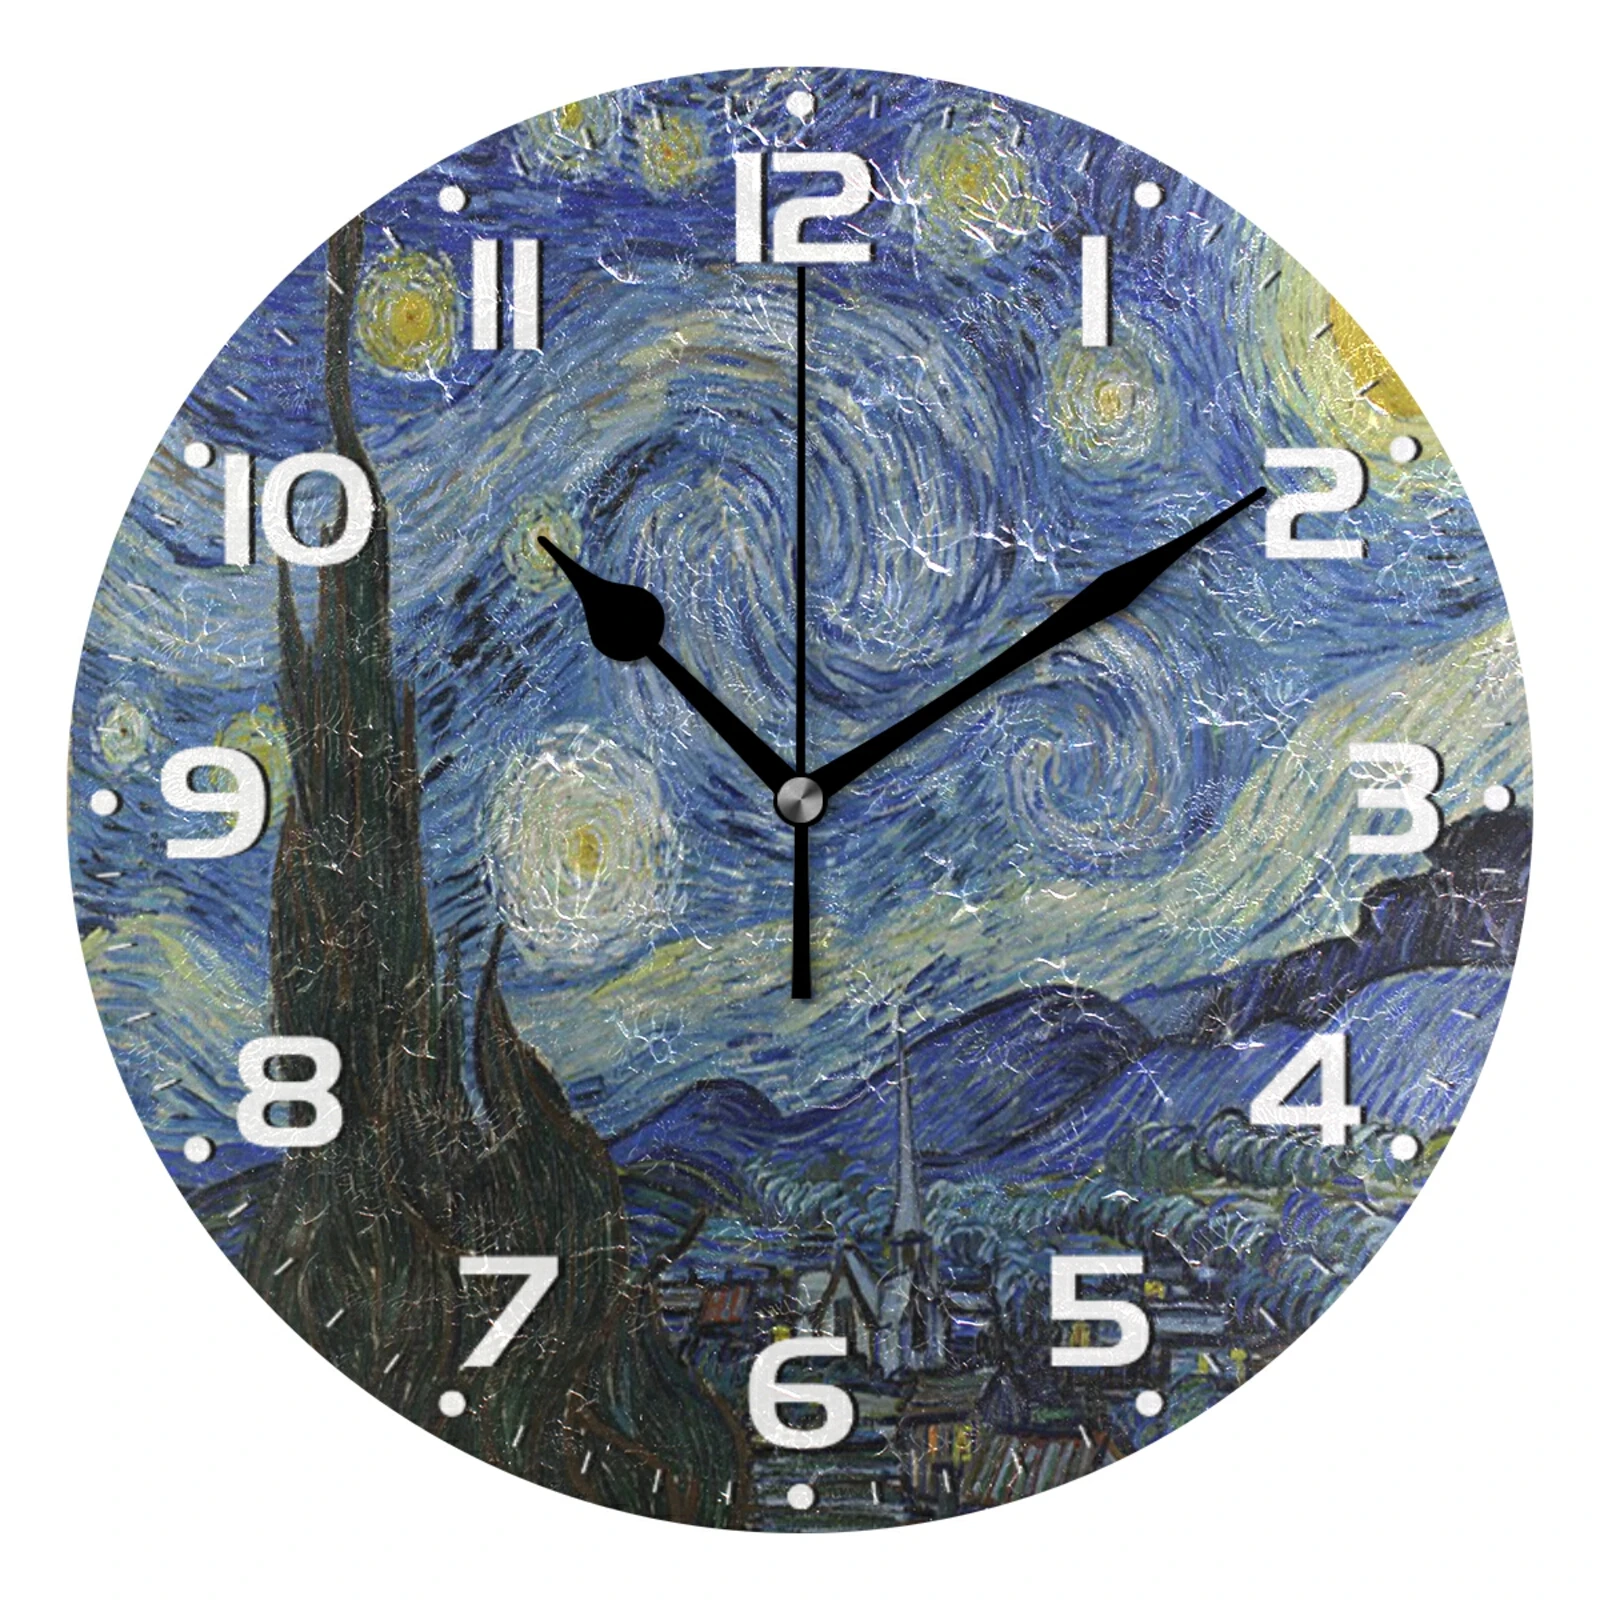 ALAZA Floral Seamless Acrylic Painted Silent Non-Ticking Round Wall Clock 12 Inch Battery Operated Quiet Bathroom Clock for Living Room Bedroom Kitchen Office Decor